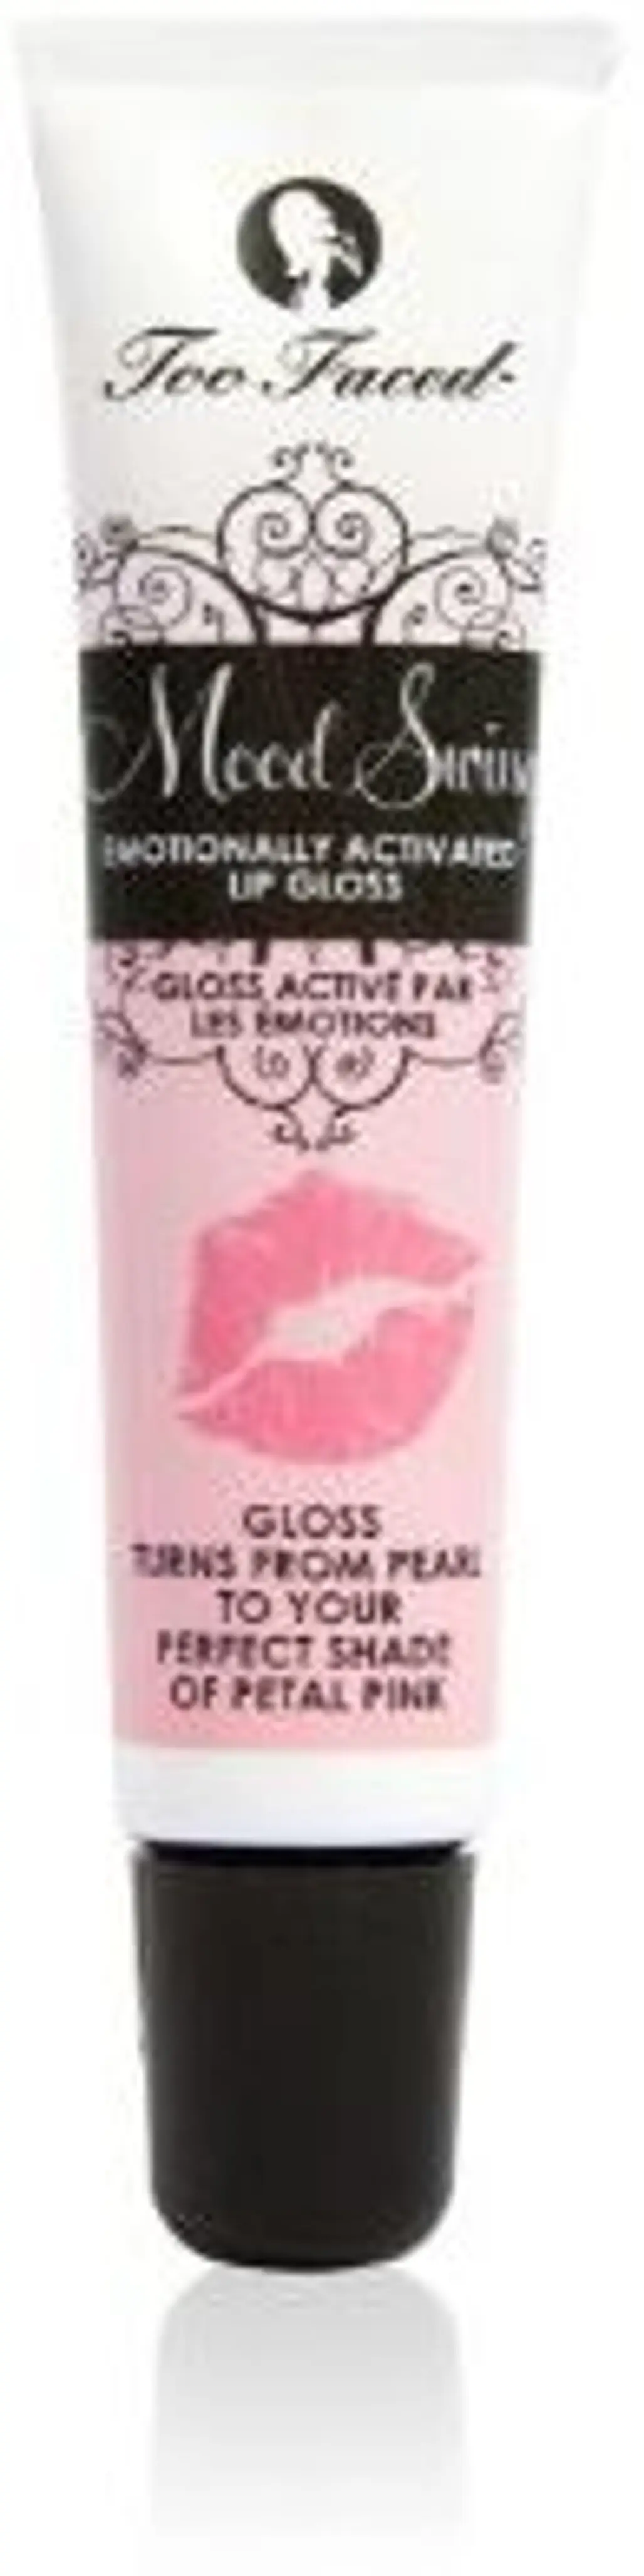 Too Faced Mood Swing Emotionally Activated Lip Gloss